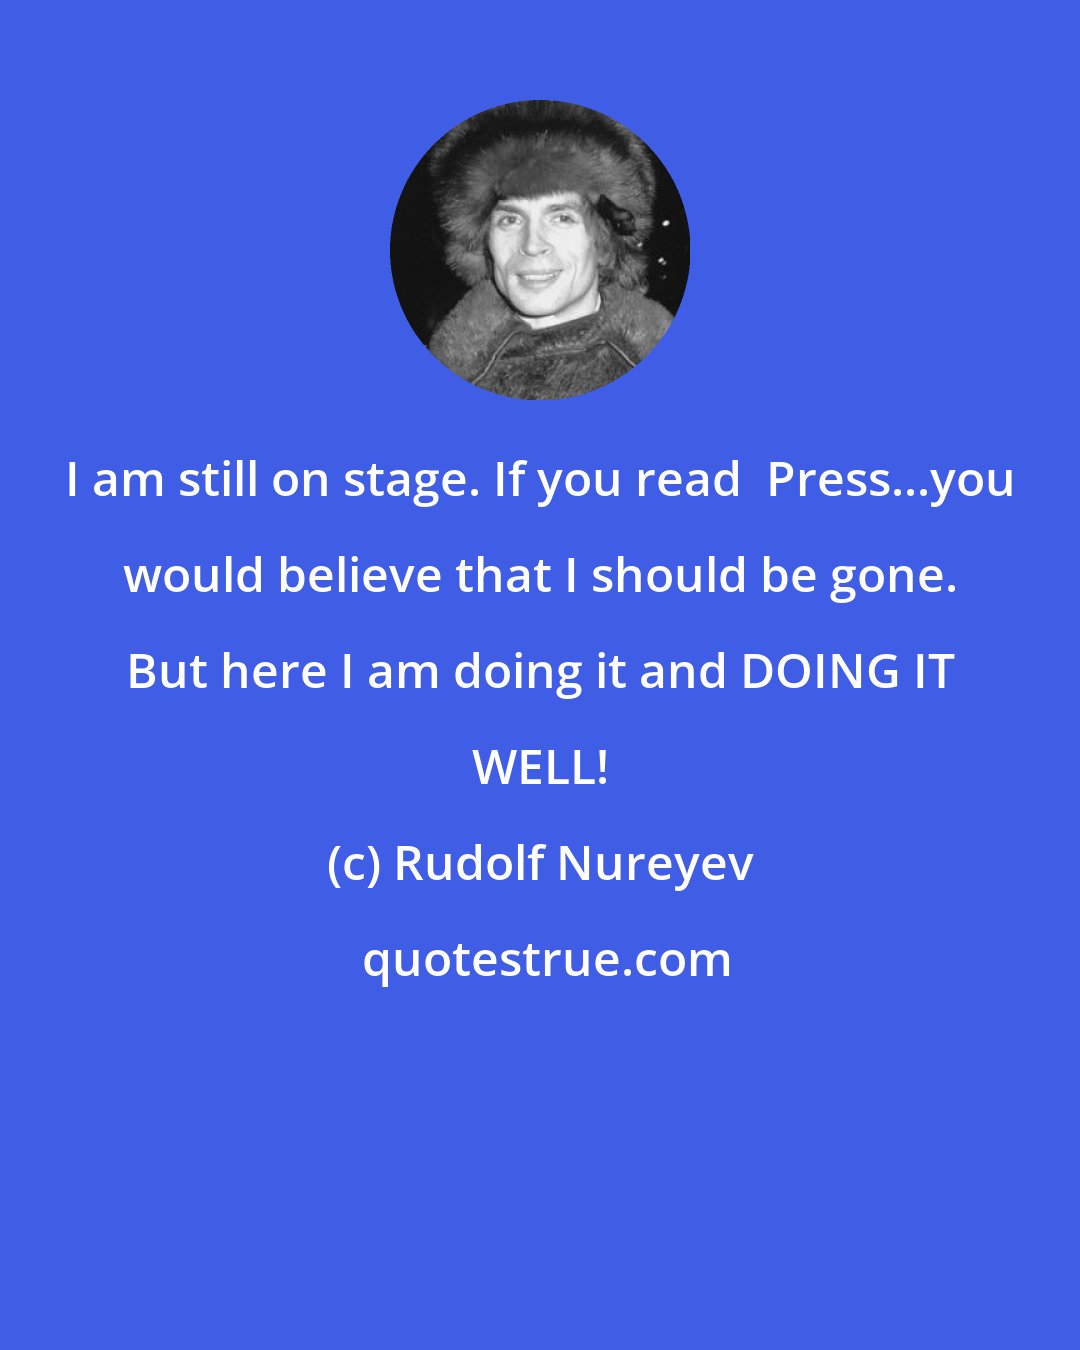 Rudolf Nureyev: I am still on stage. If you read  Press...you would believe that I should be gone. But here I am doing it and DOING IT WELL!